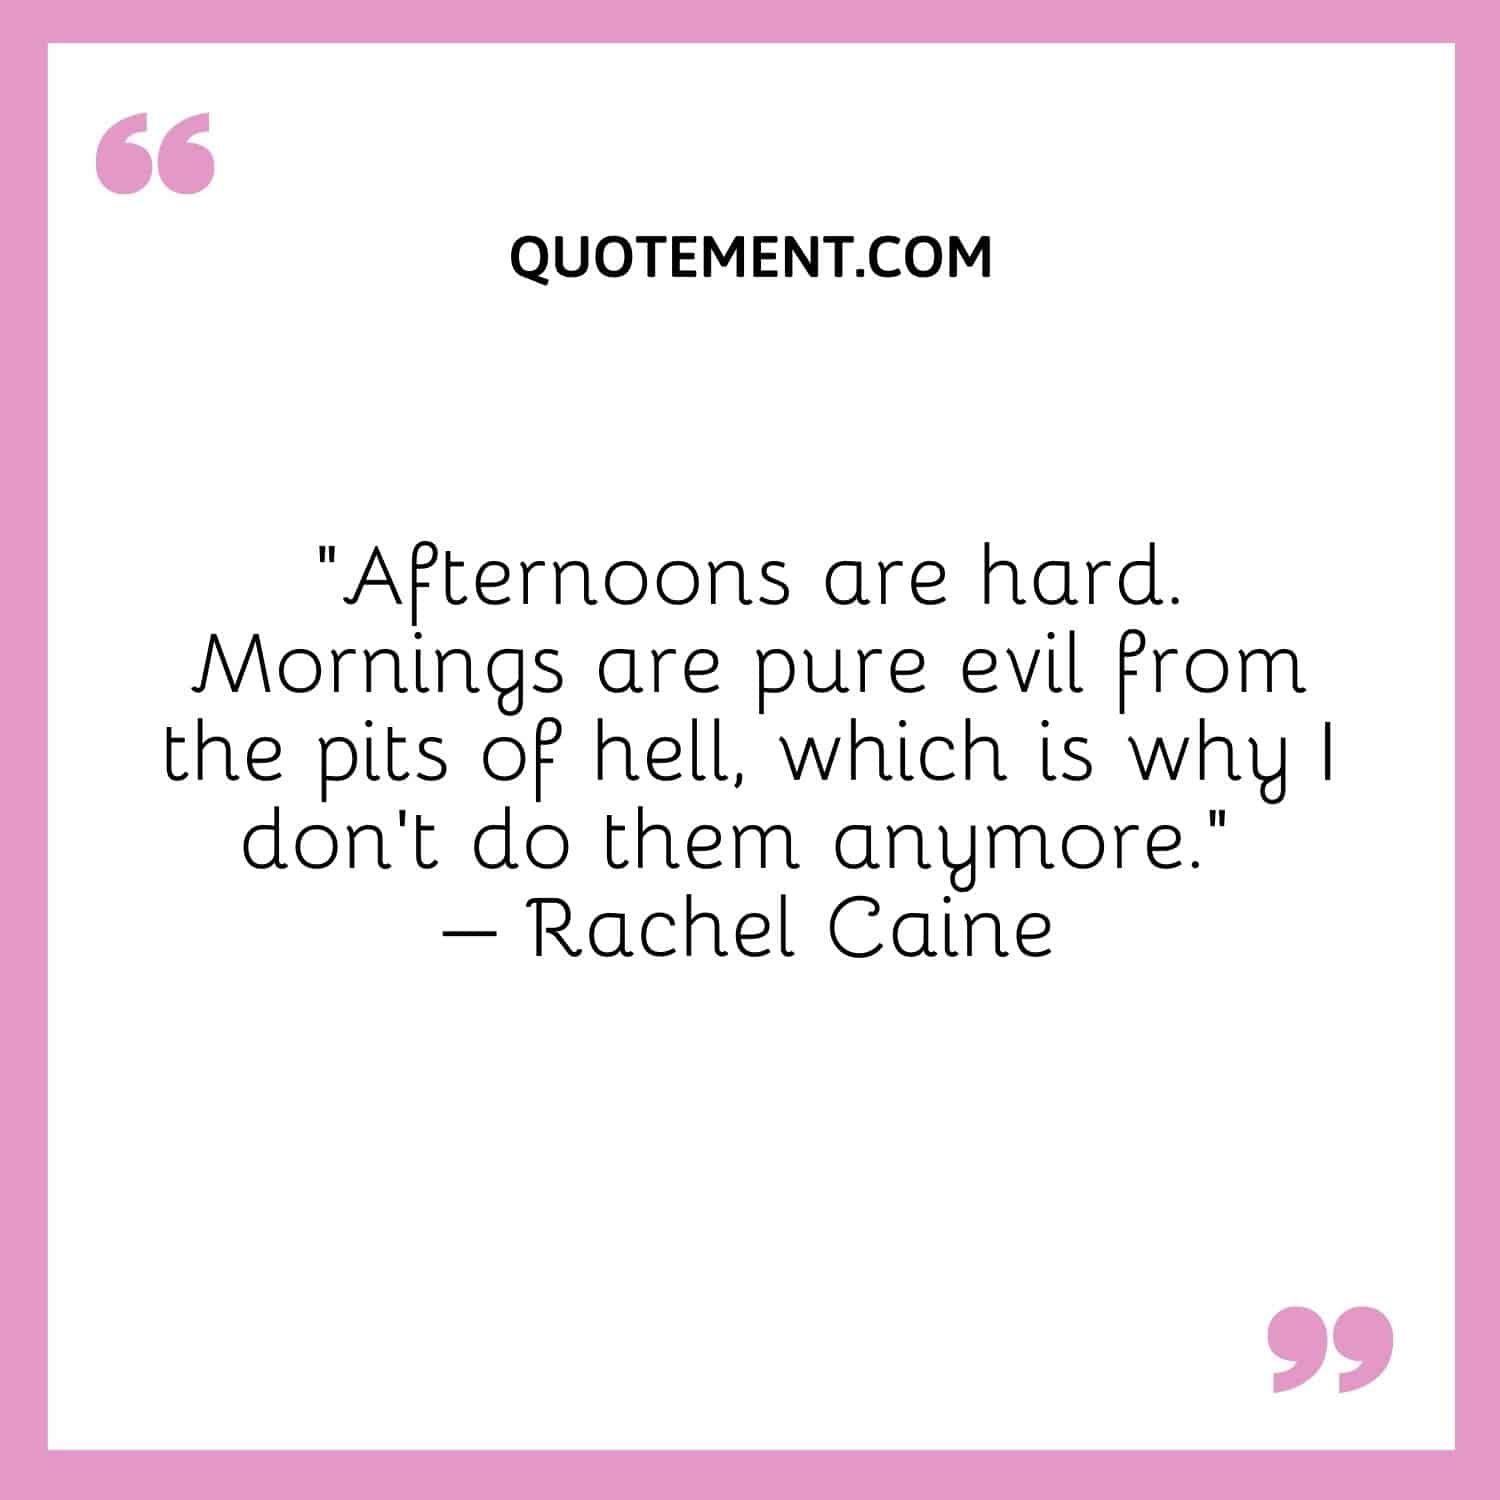 Afternoons are hard. Mornings are pure evil from the pits of hell, which is why I don't do them anymore. – Rachel Caine